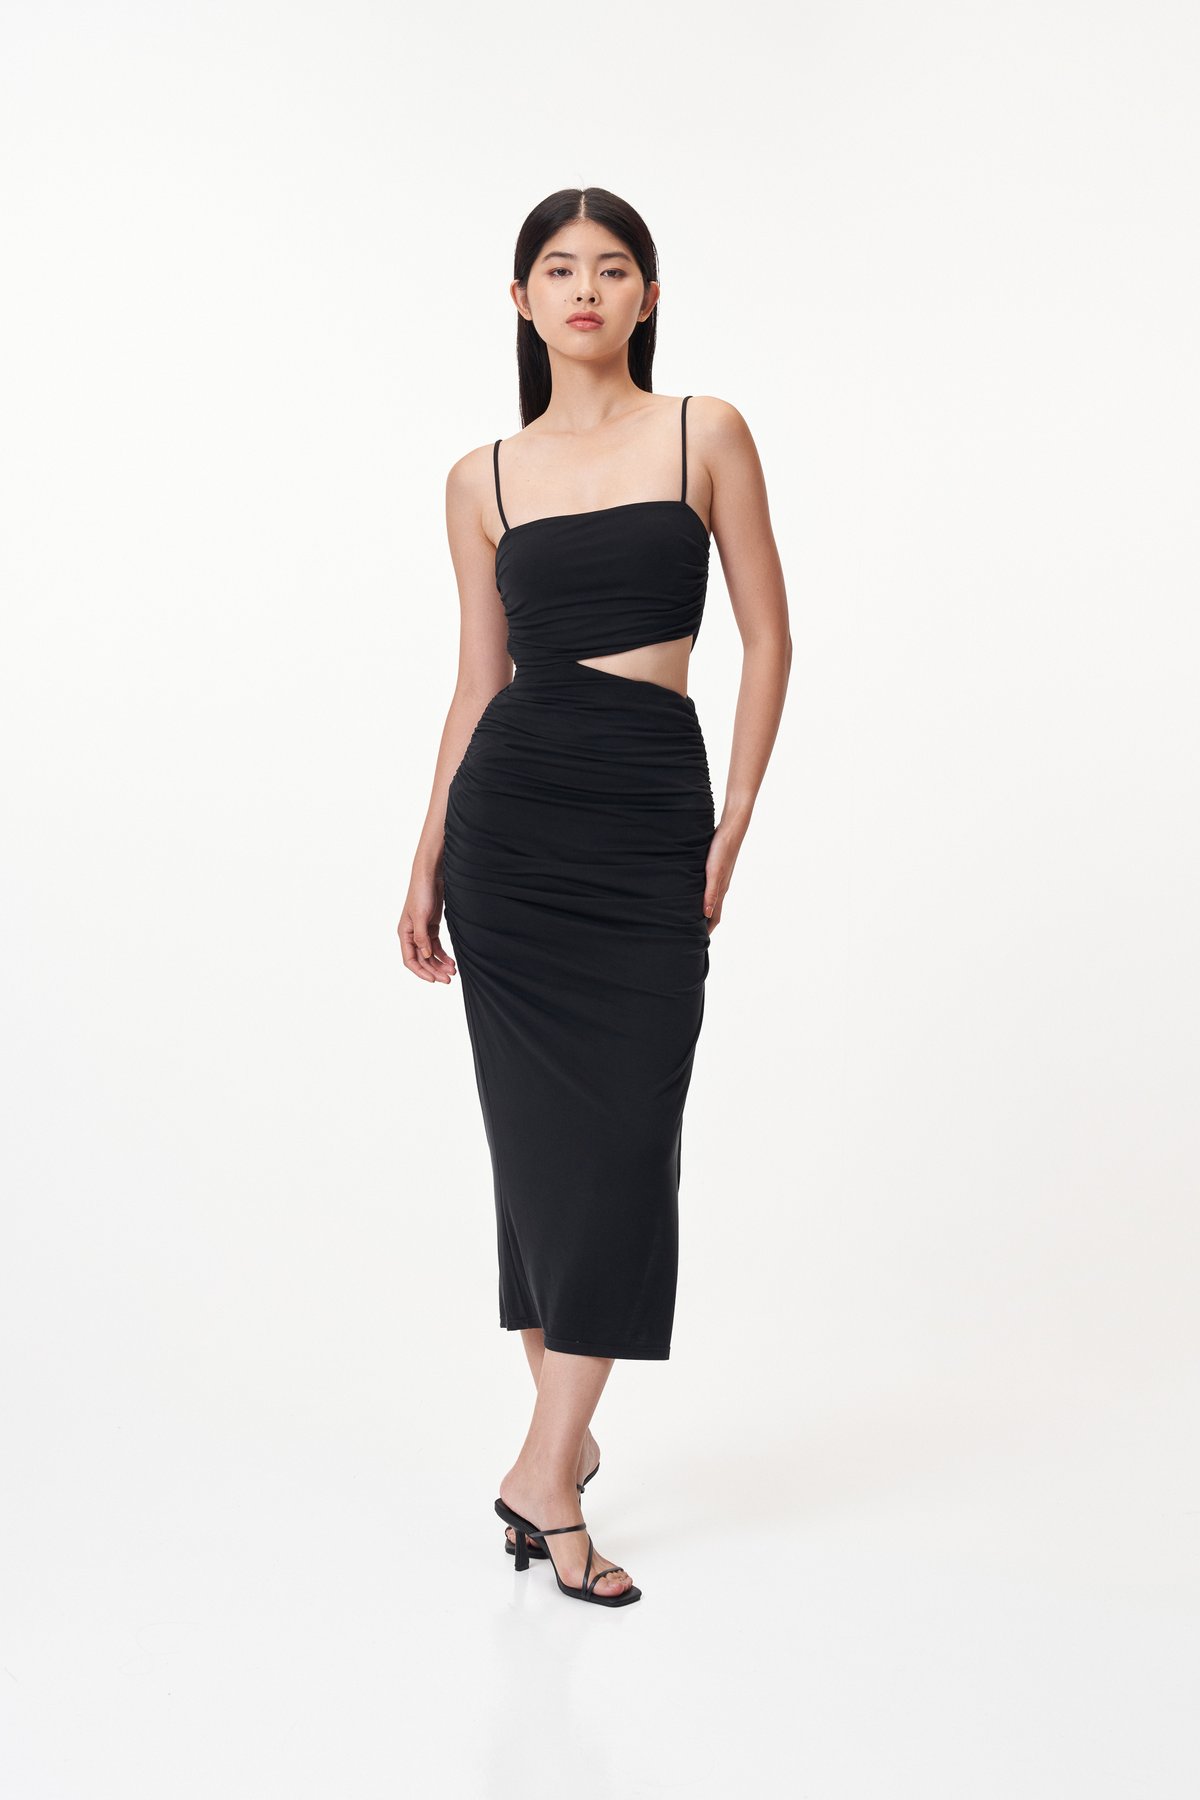 *Pre-order* Genn Cut-Out Ruched Dress in Black